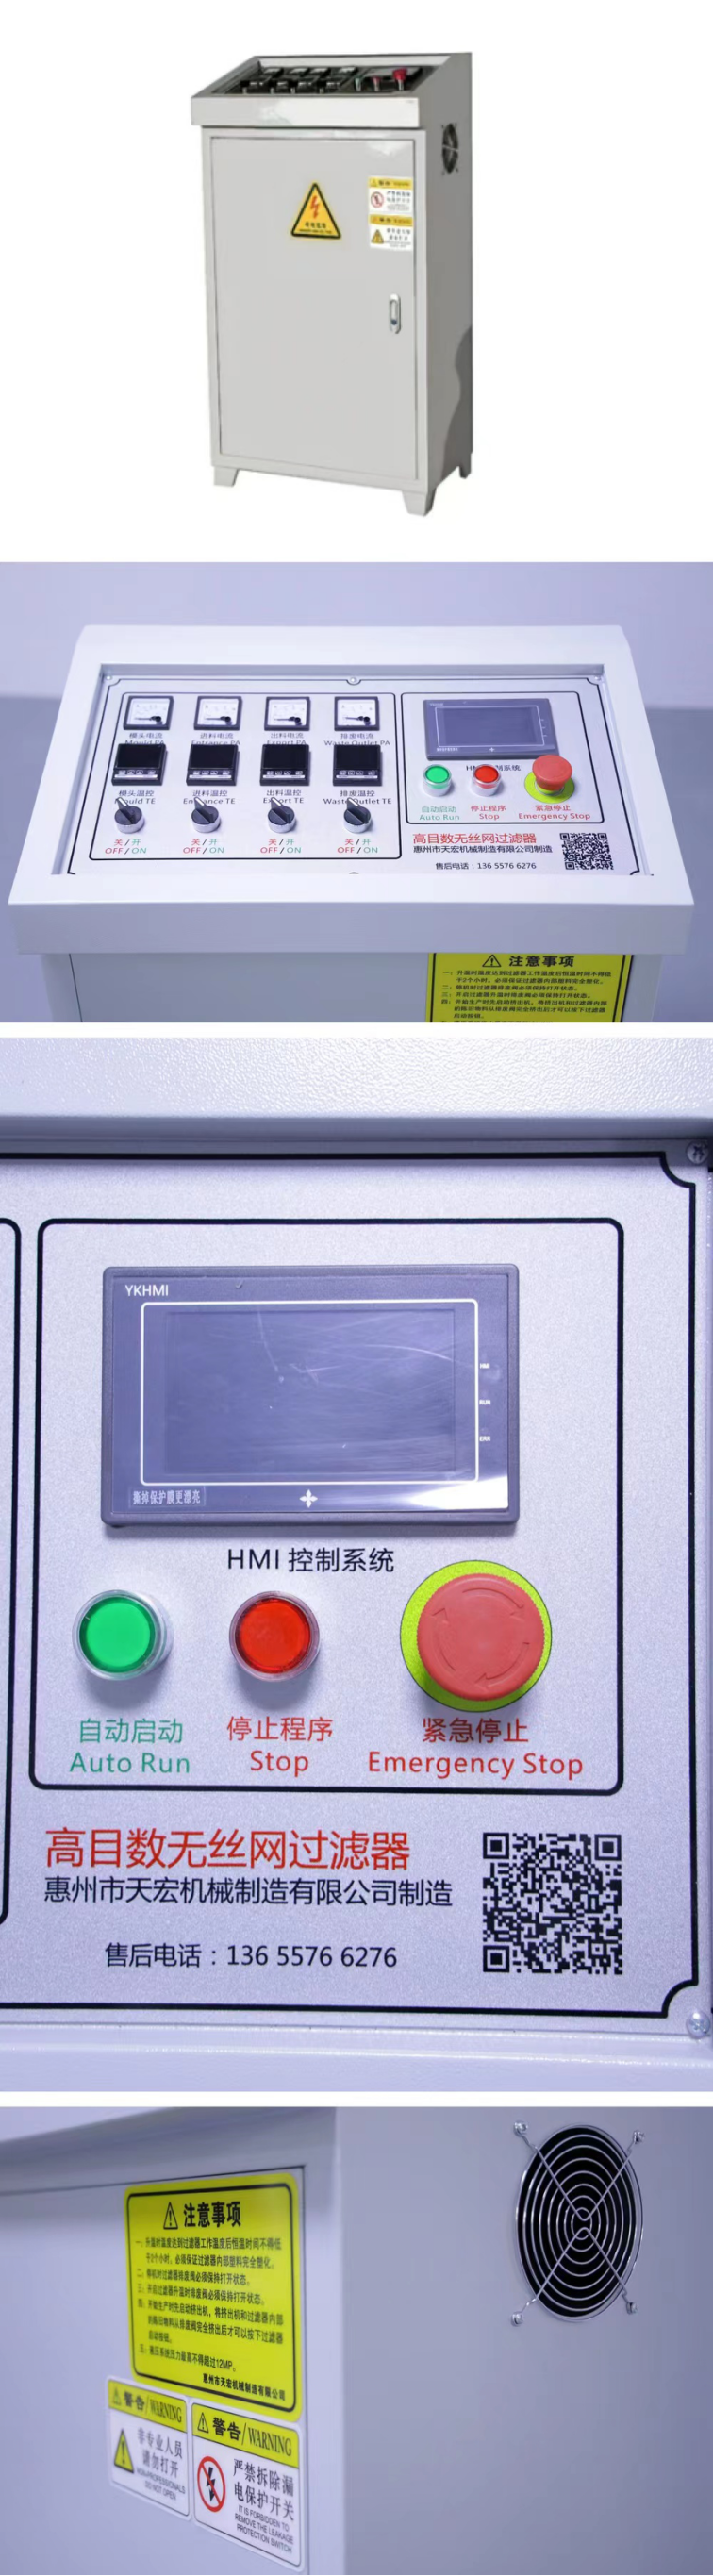 Multilingual System Plastic Recycling Filter Control Cabinets